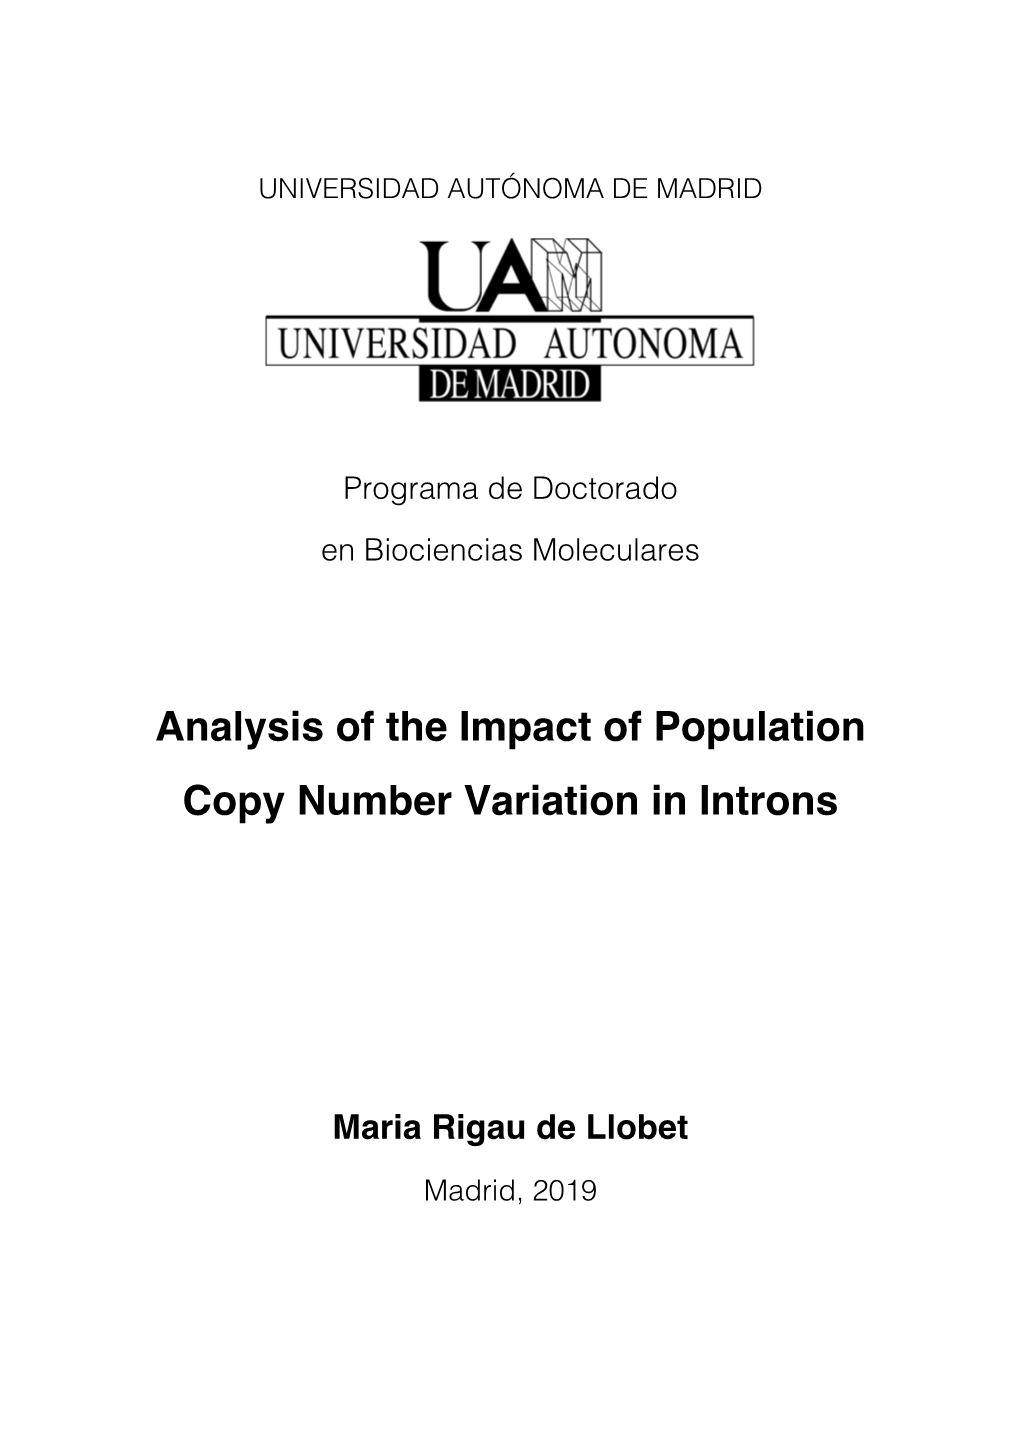 Analysis of the Impact of Population Copy Number Variation in Introns